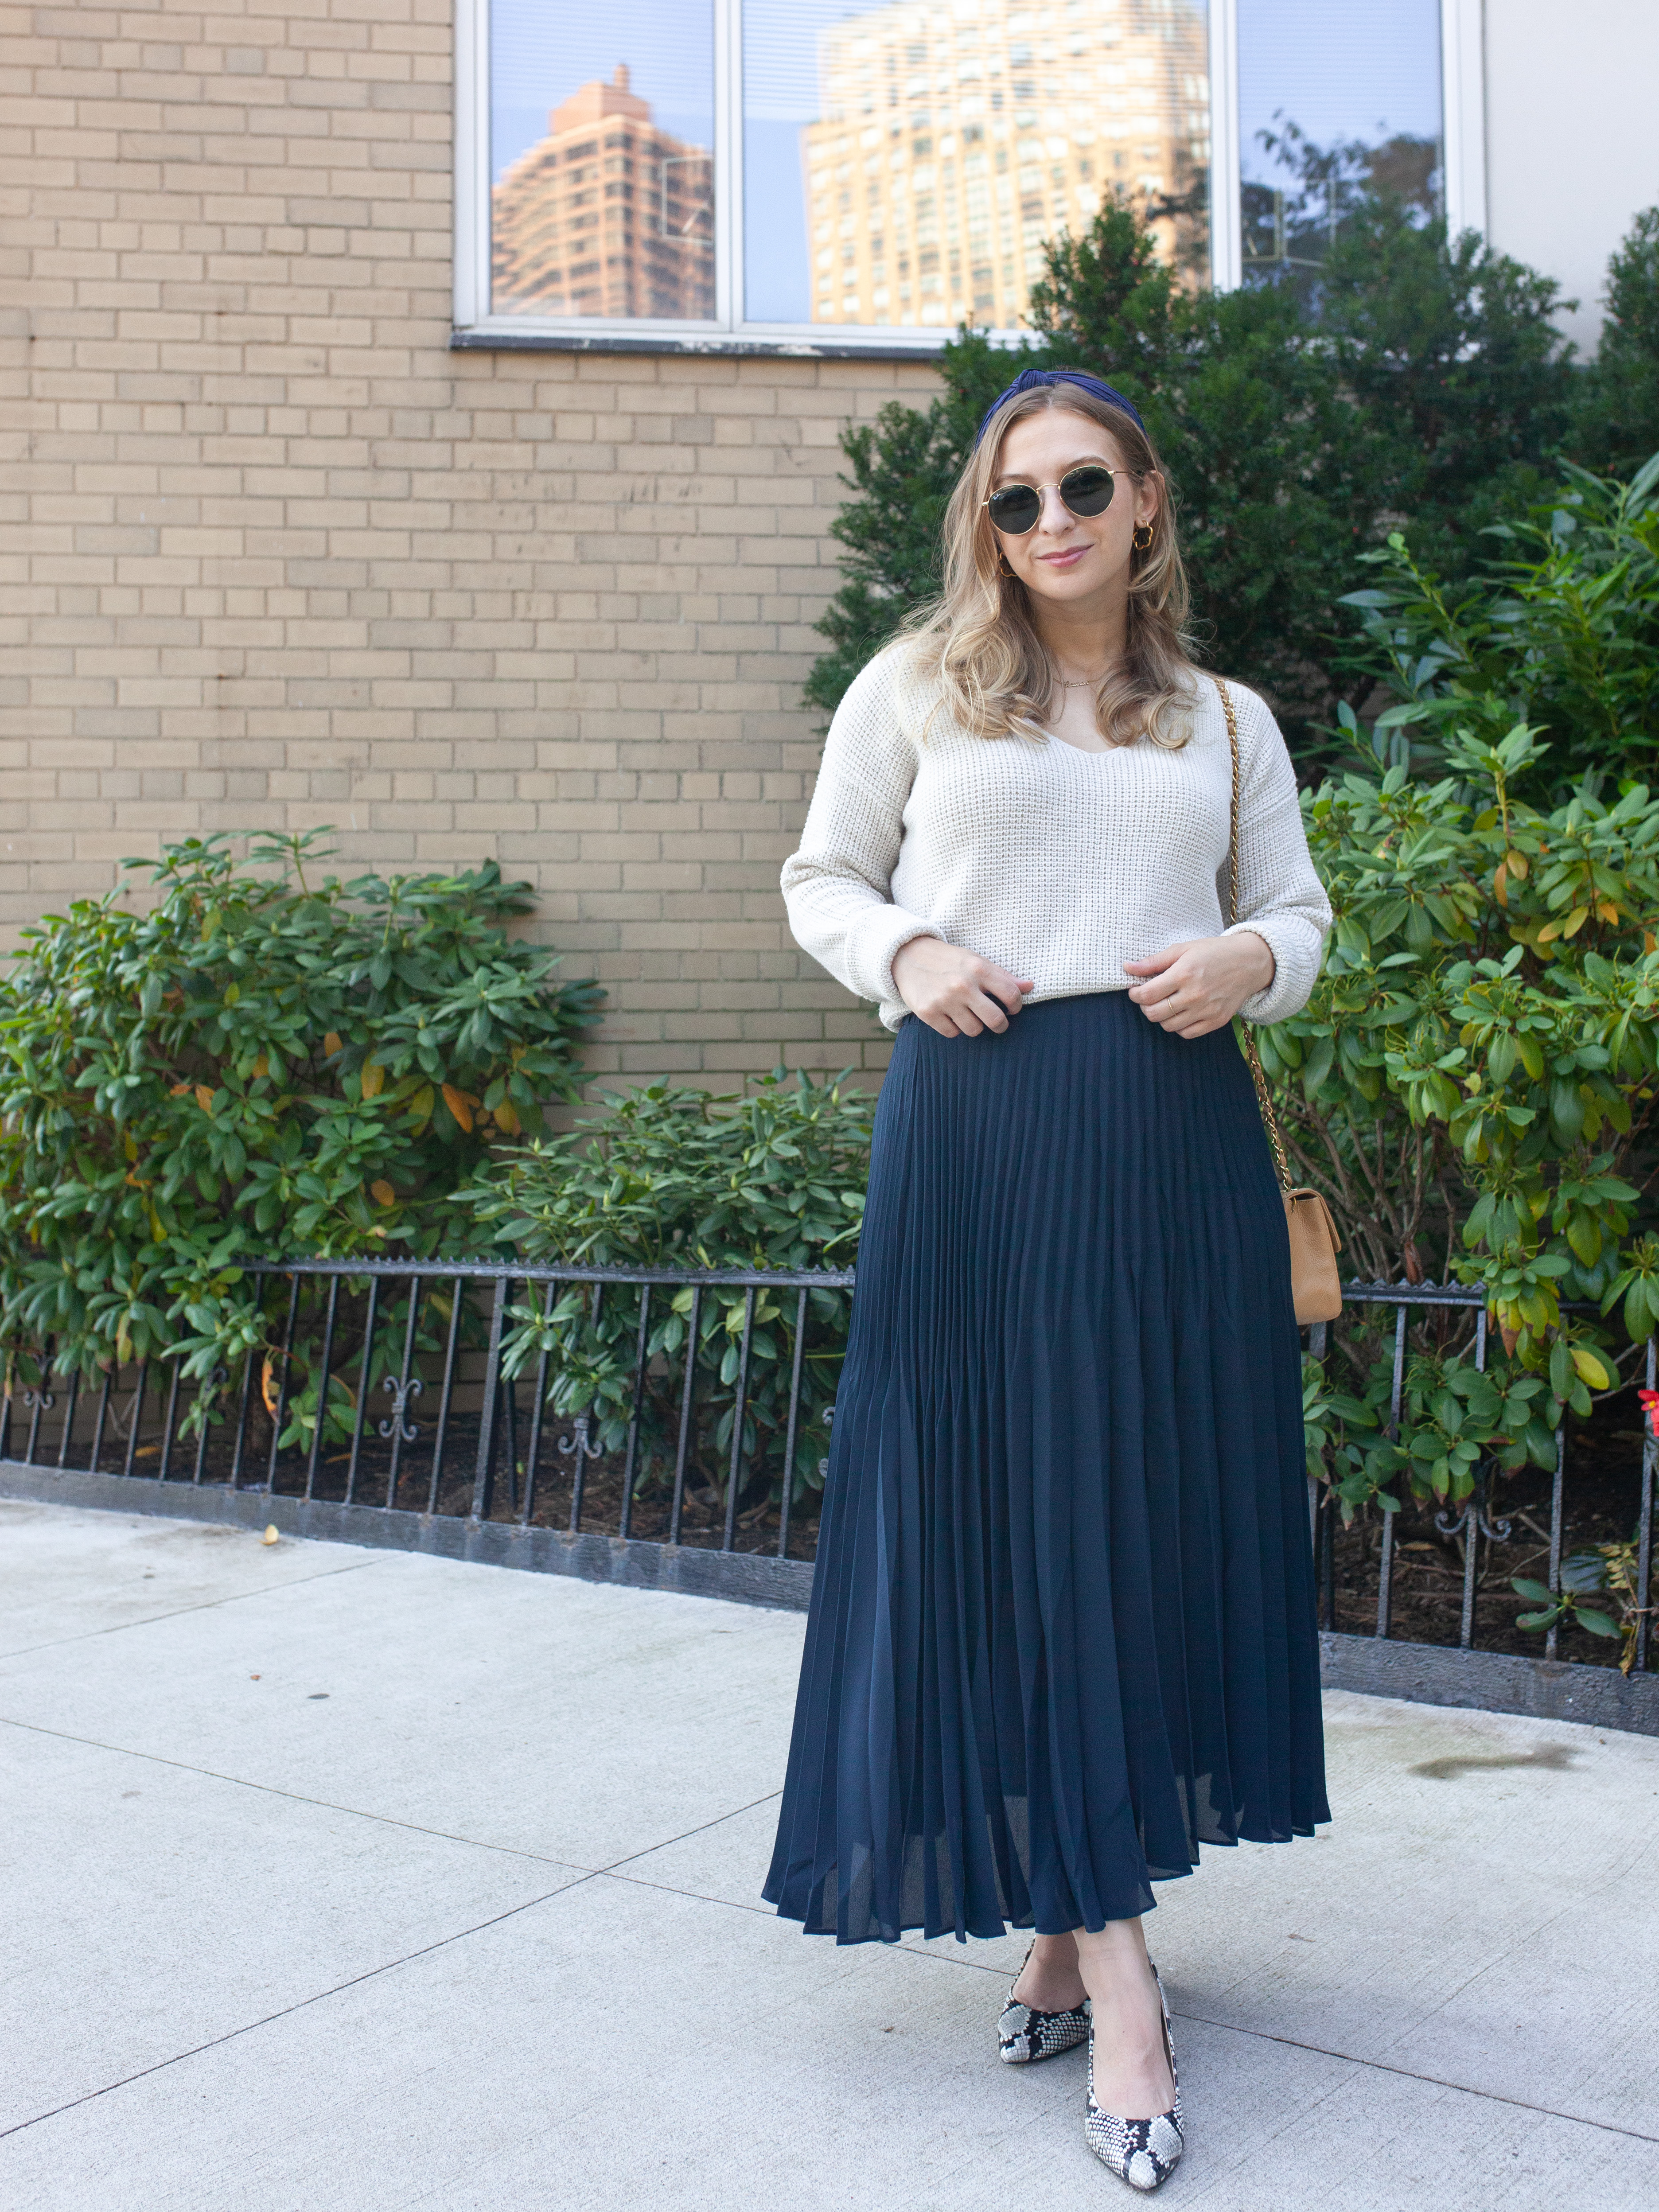 girl with blonde hair wearing navy blue maxi skirt, snakeskin high heels, oatmeal sweater and sunglasses